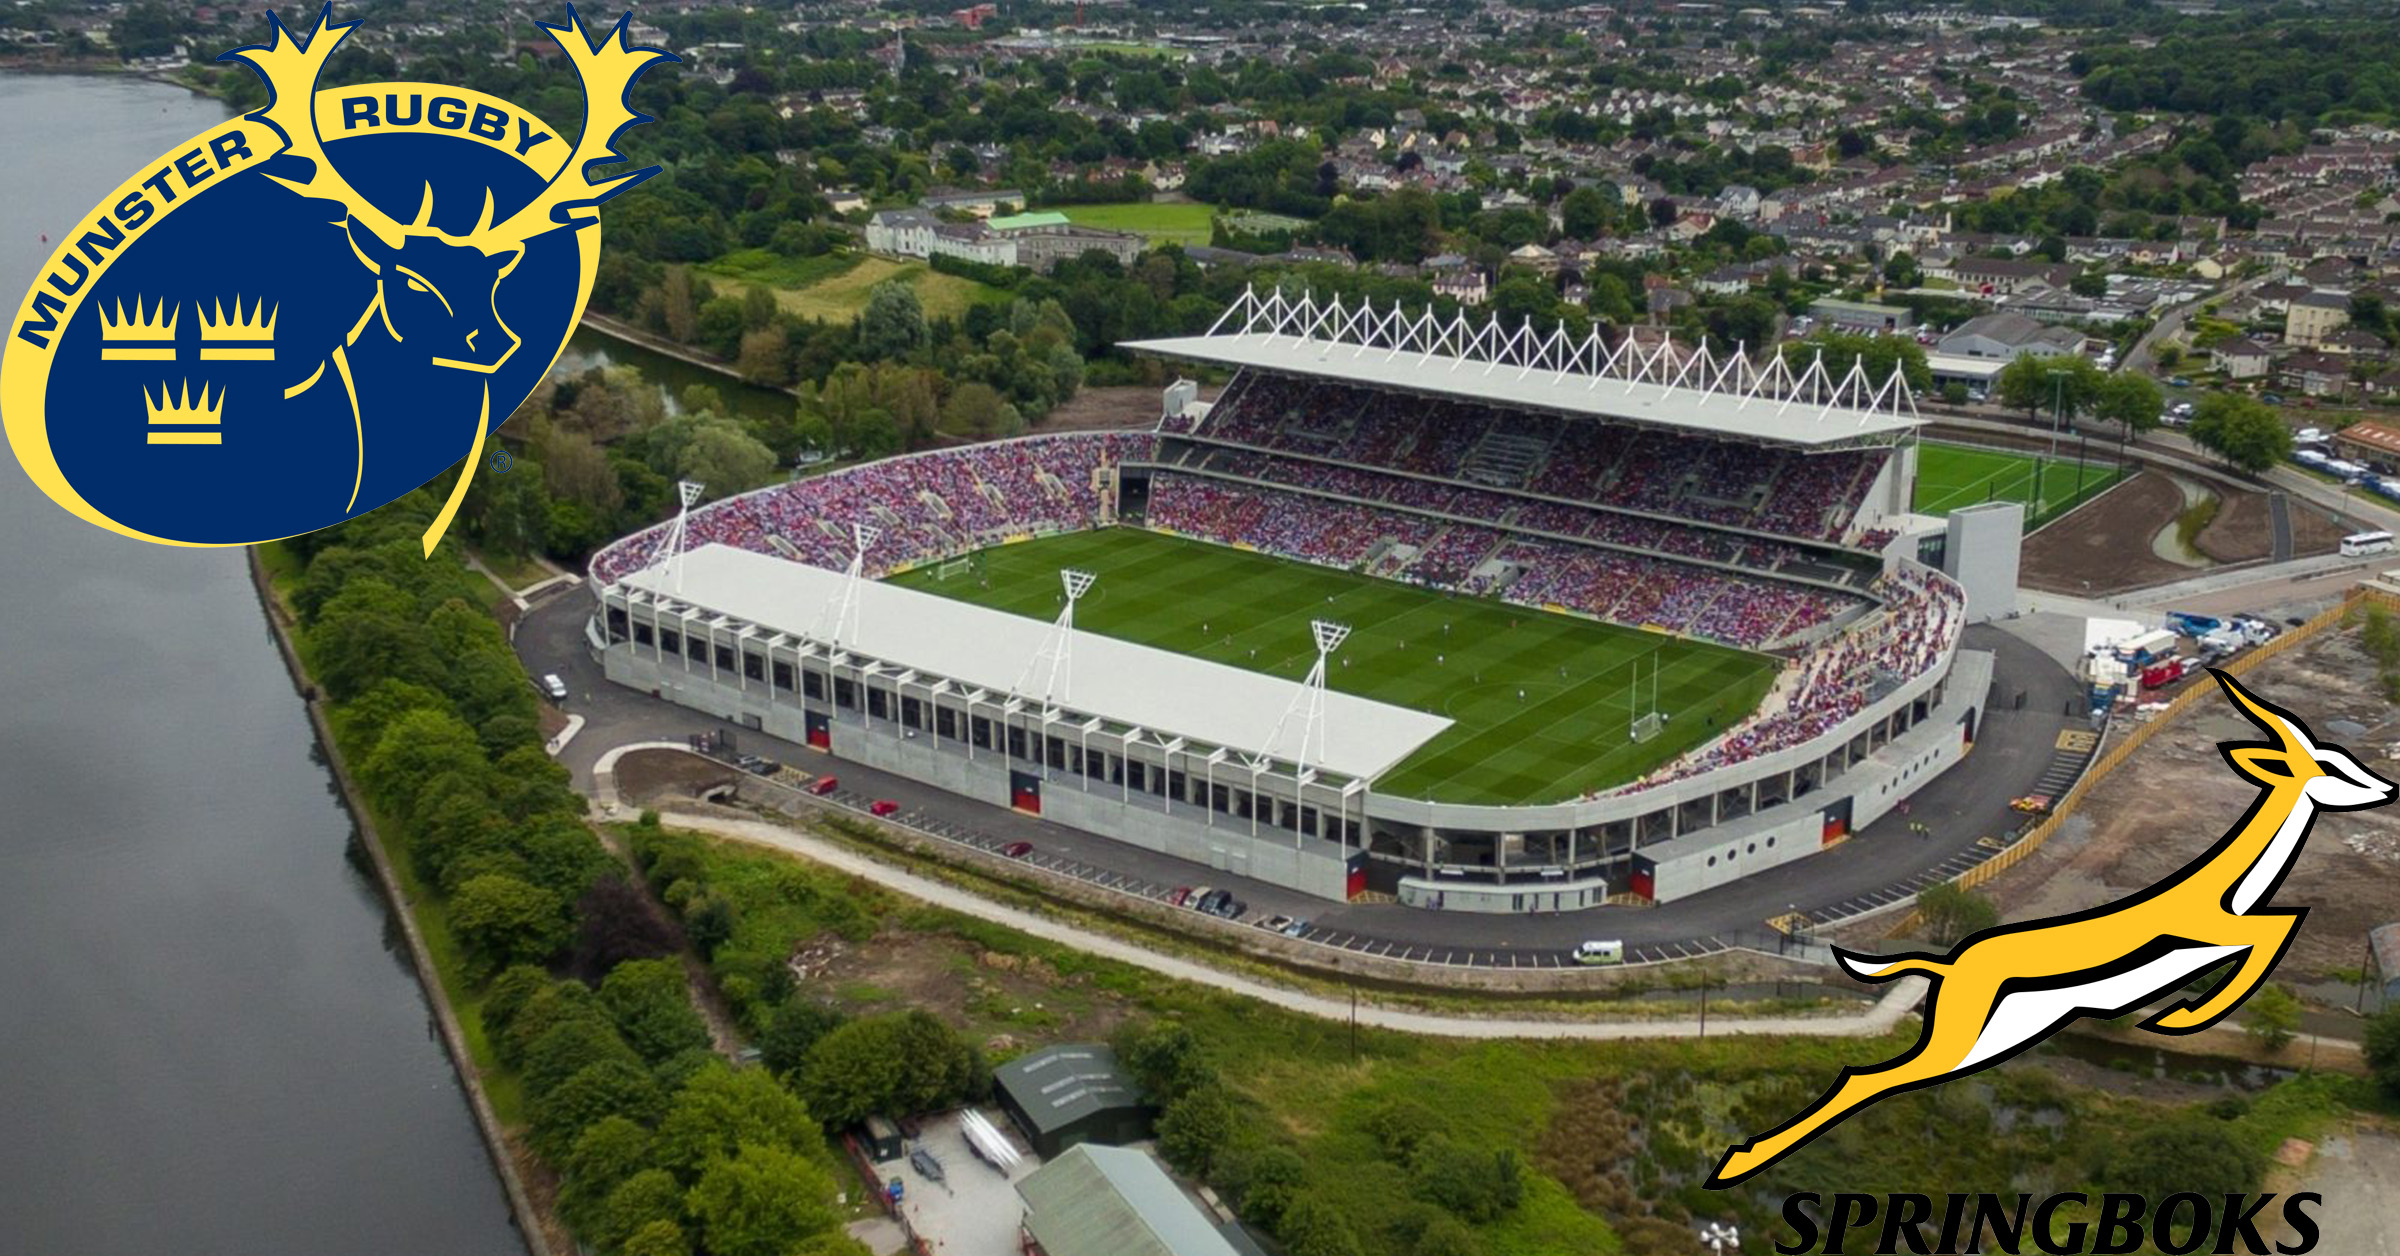 BREAKING: Páirc Uí Chaoimh Set to Host a Major Rugby Match Between Munster  vs South Africa